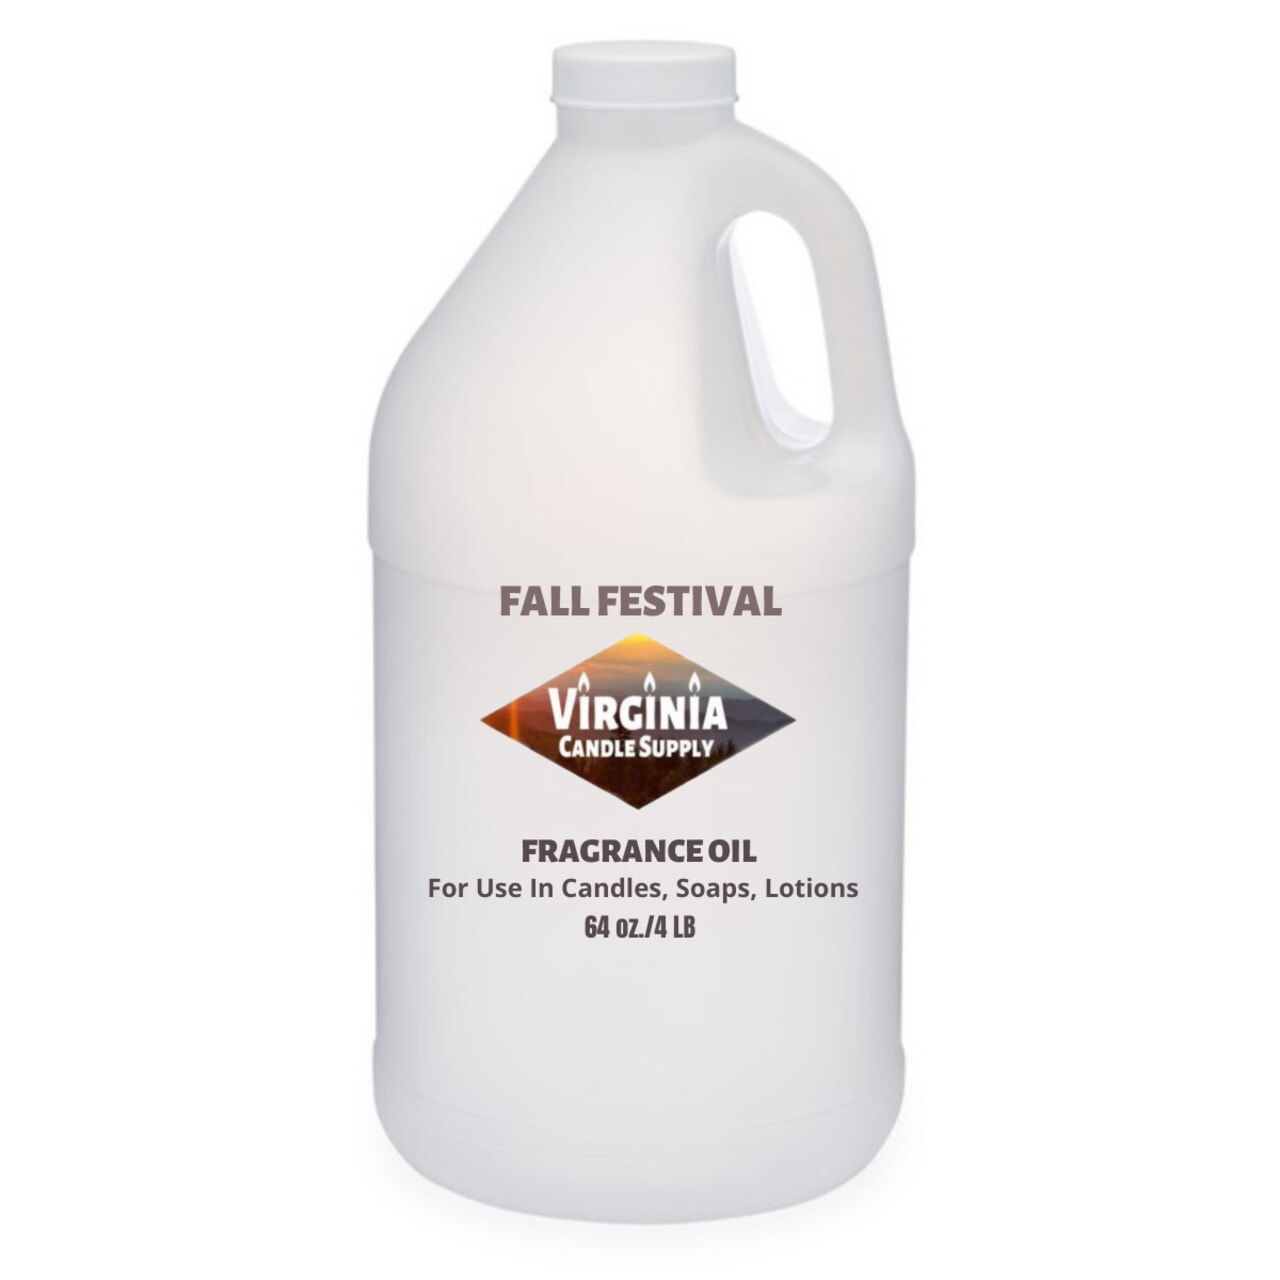 Fall Festival Fragrance Oil (Our Version of the Brand Name) (64 oz Jug) for  Candle Making, Soap Making, Tart Making, Room Sprays, Lotions, Car  Fresheners, Slime, Bath Bombs, Warmers…